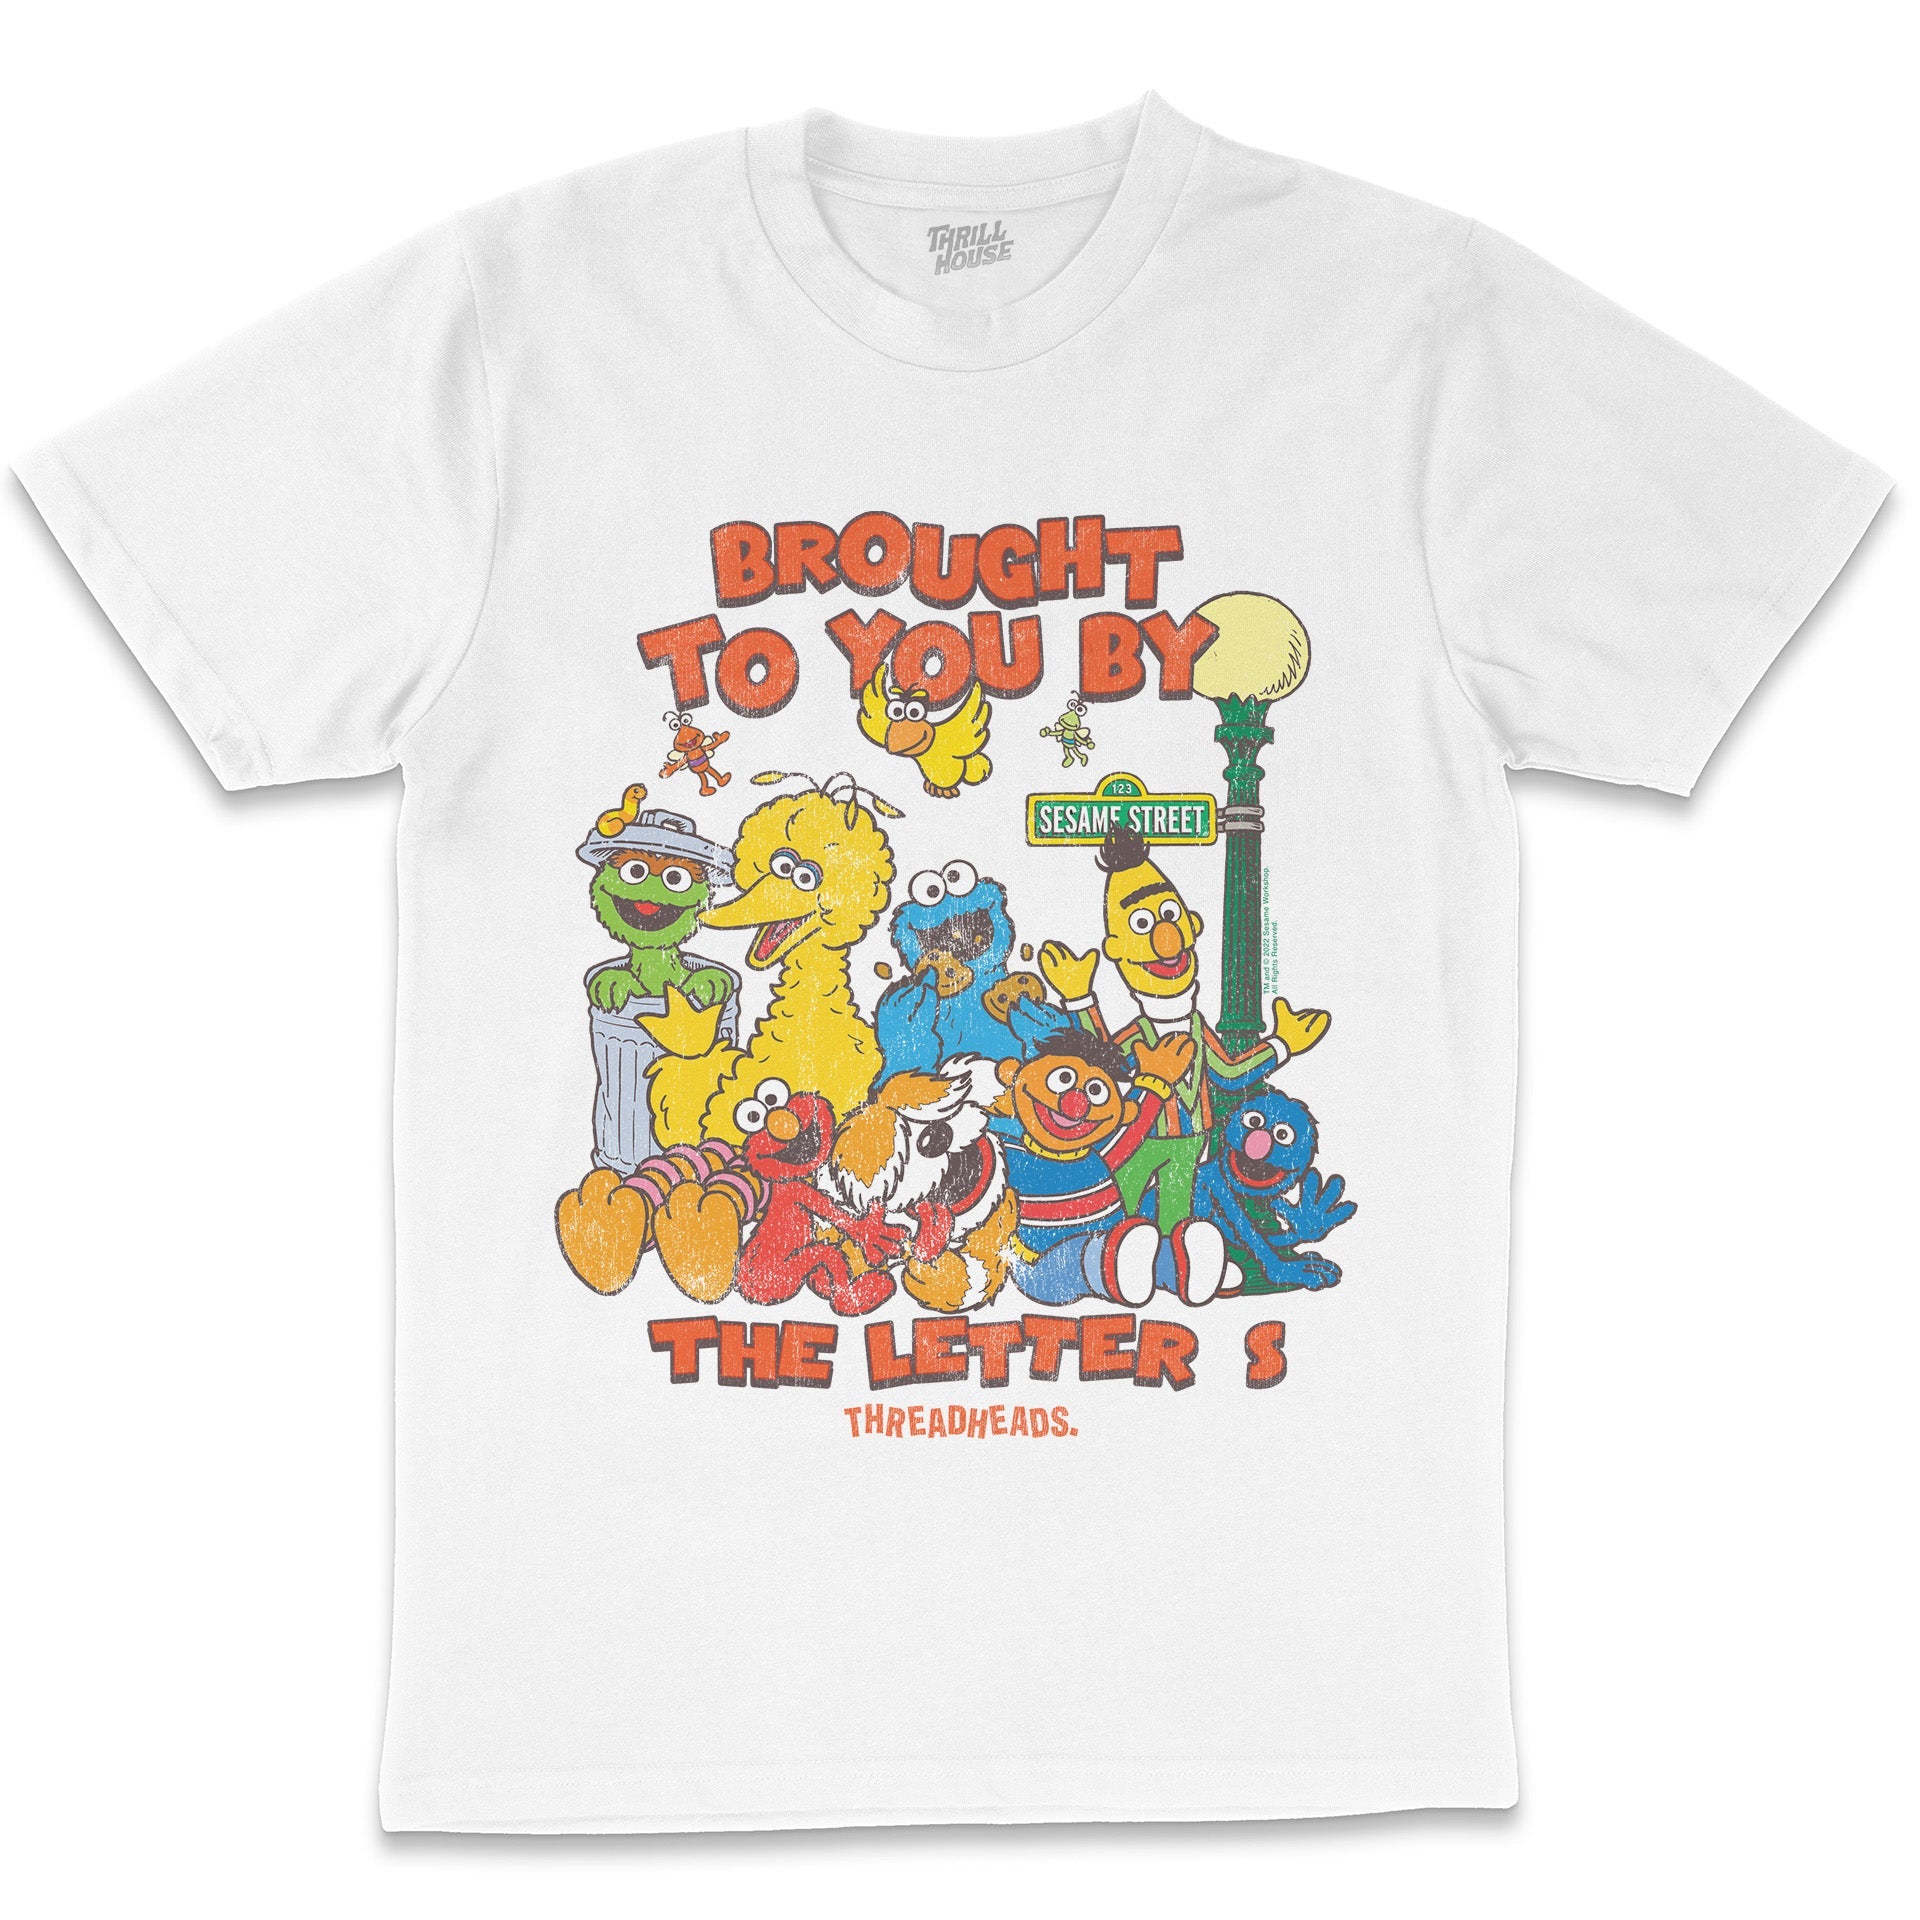 Sesame Street Brought To You By The Letter S Classic Retro Vintage Educational Puppet TV Program Officially Licensed T-Shirt